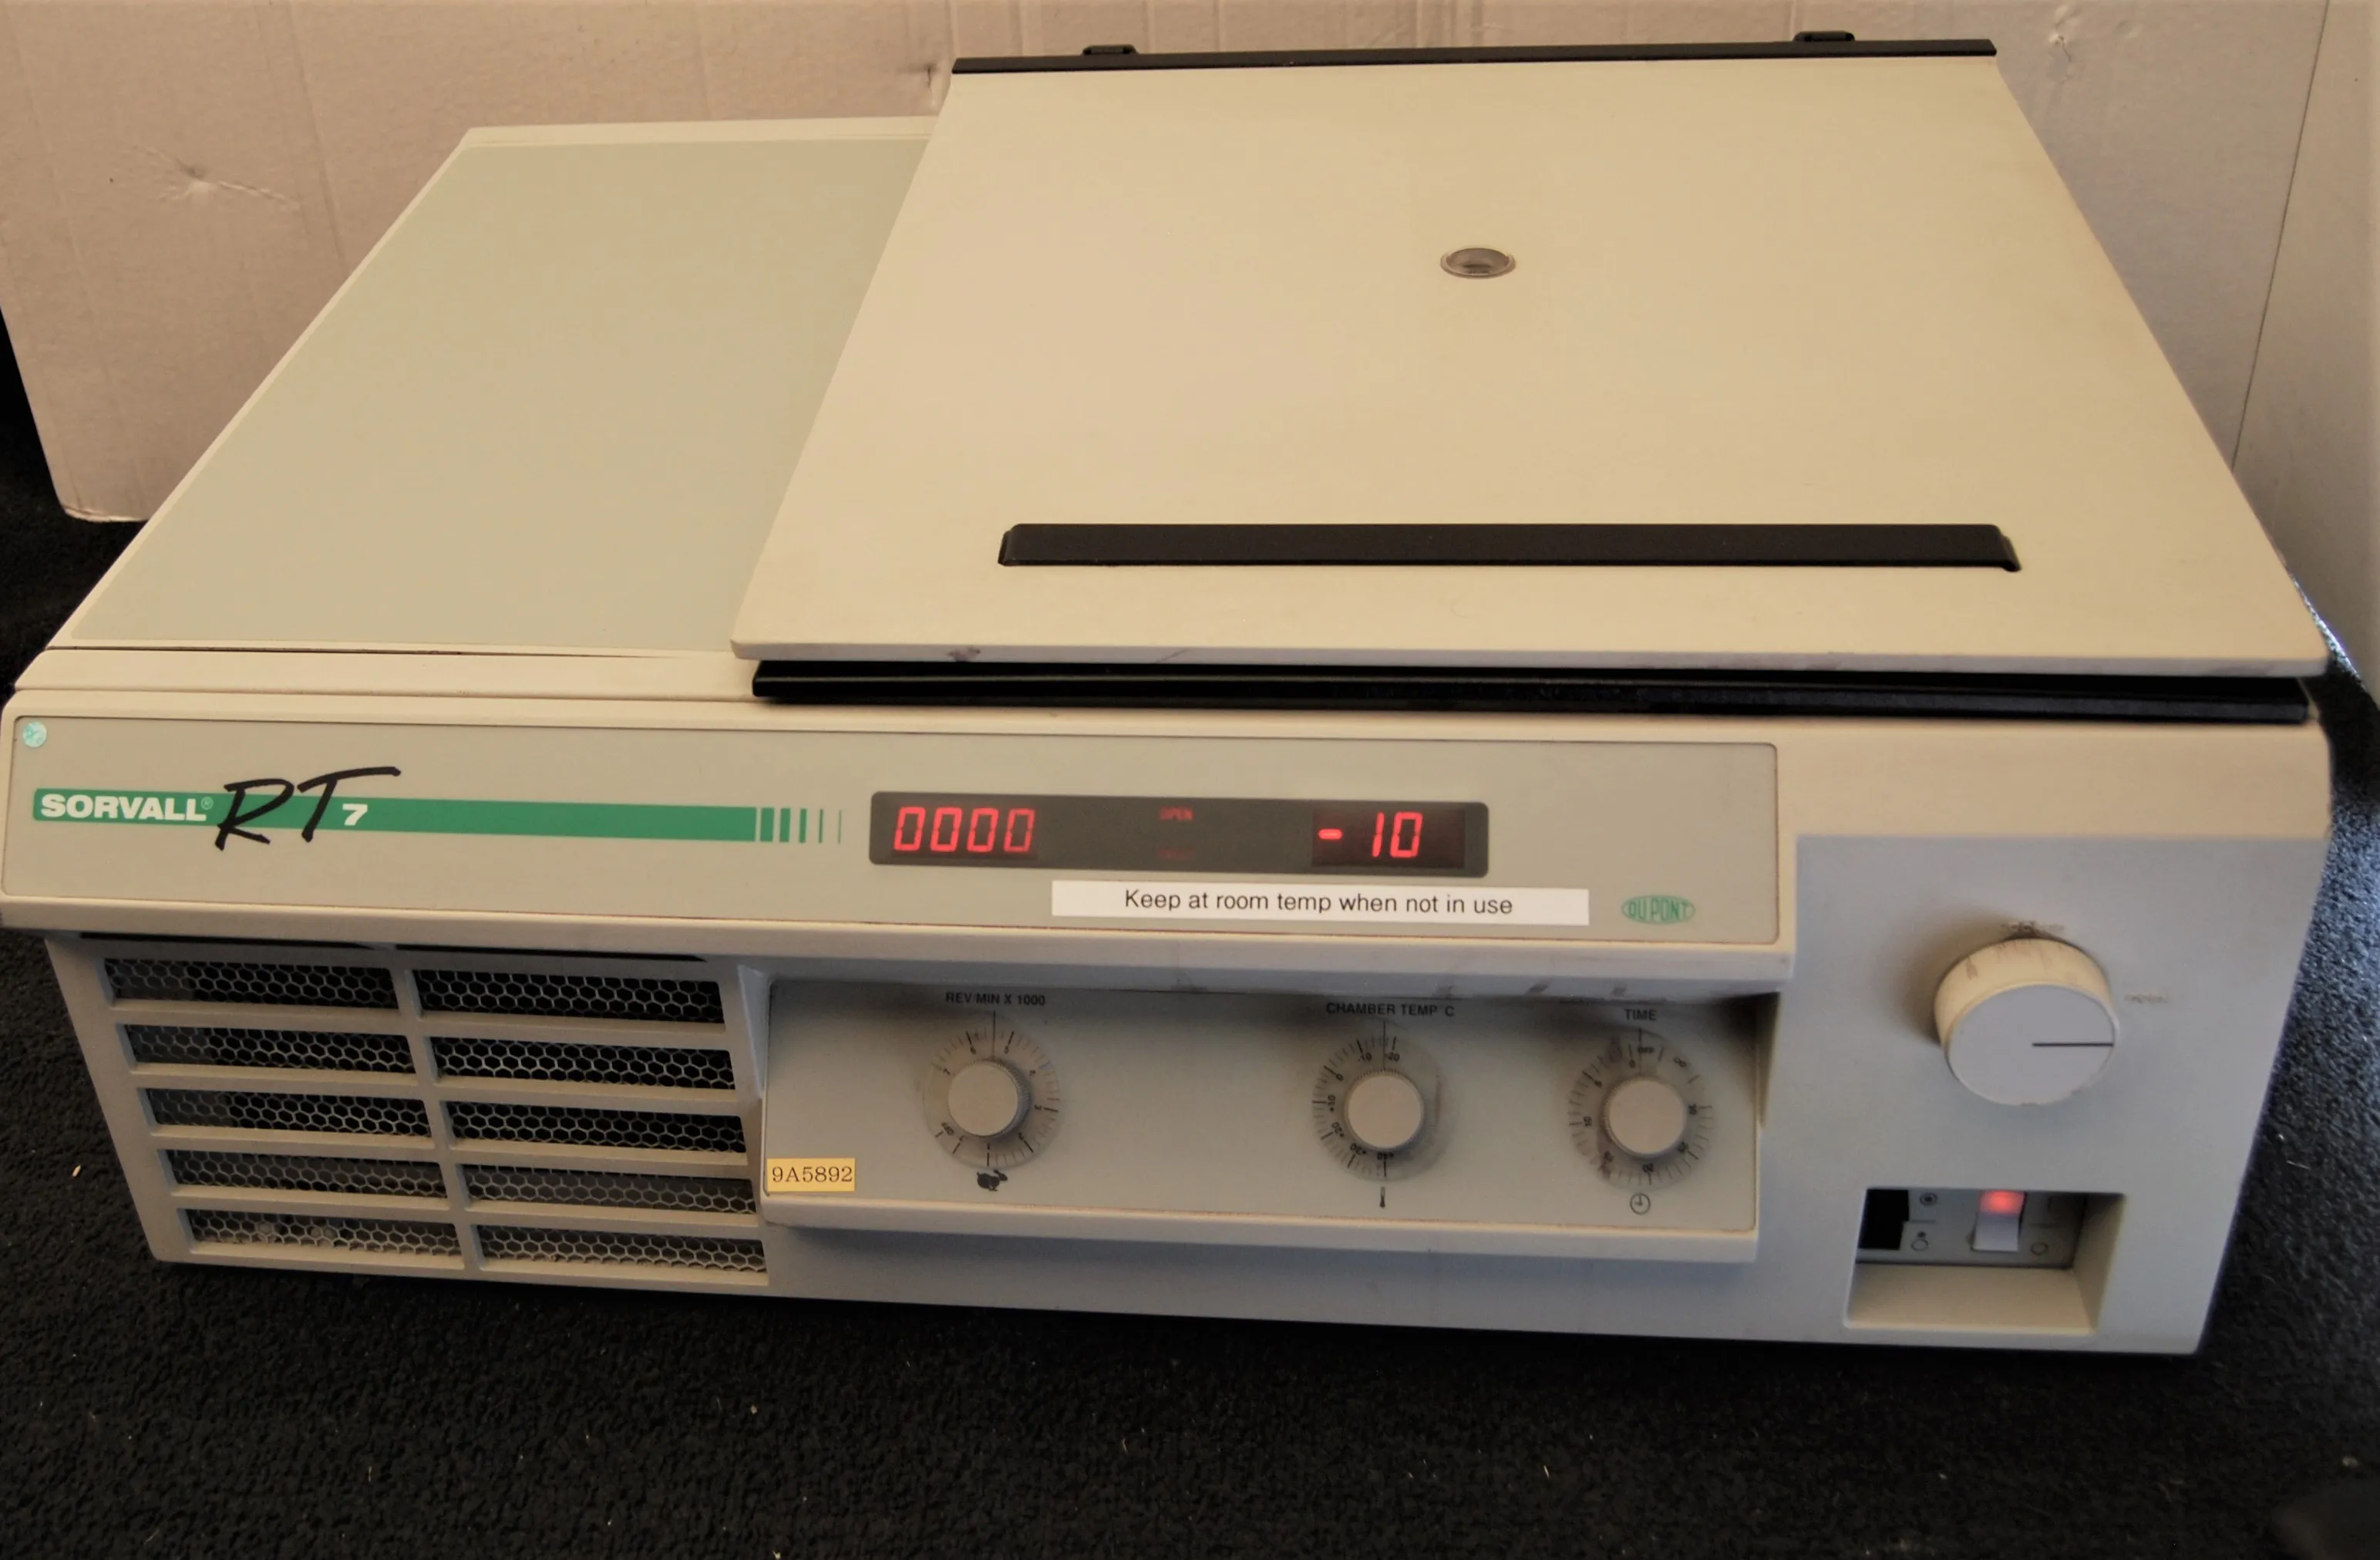 Sorvall RT 7 refrigerated centrifuge. Bench-top model. 